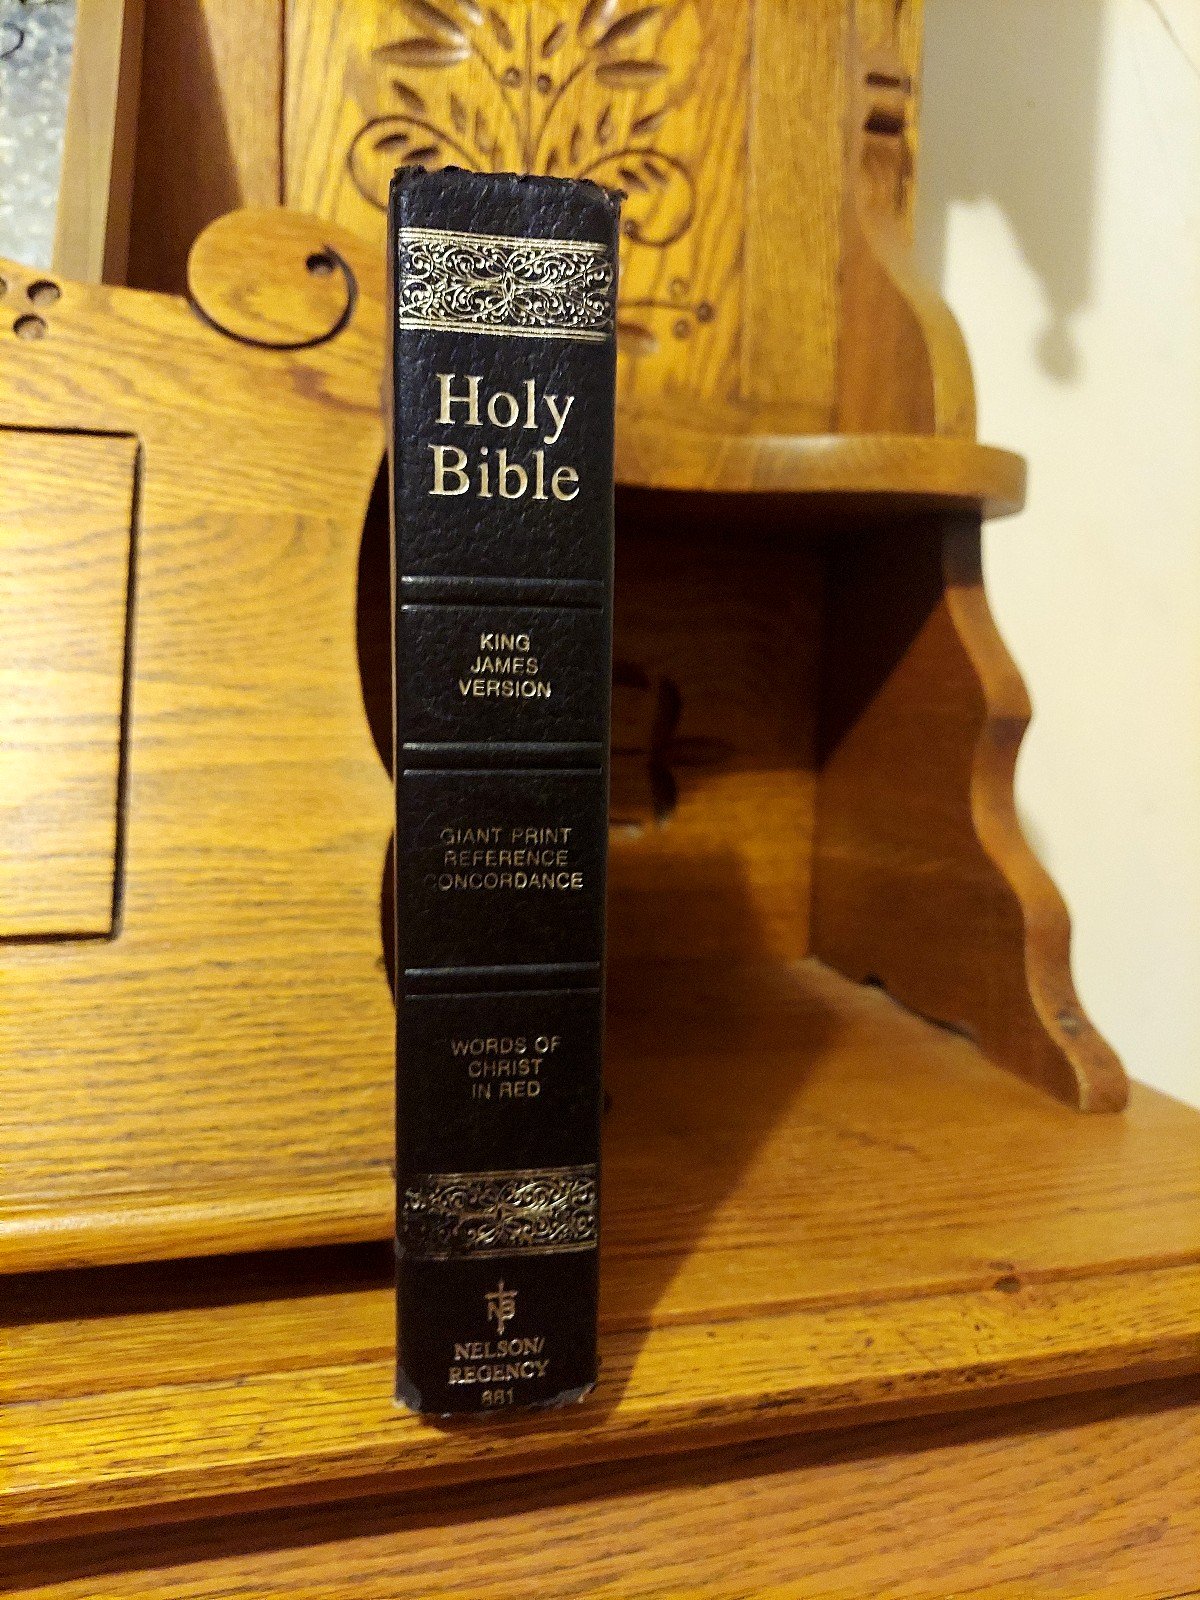 HOLY BIBLE KJV GIANT PRINT REFERENCE...CONCORDANCE...WORDS OF CHRIST IN RED... DejC1GiTV